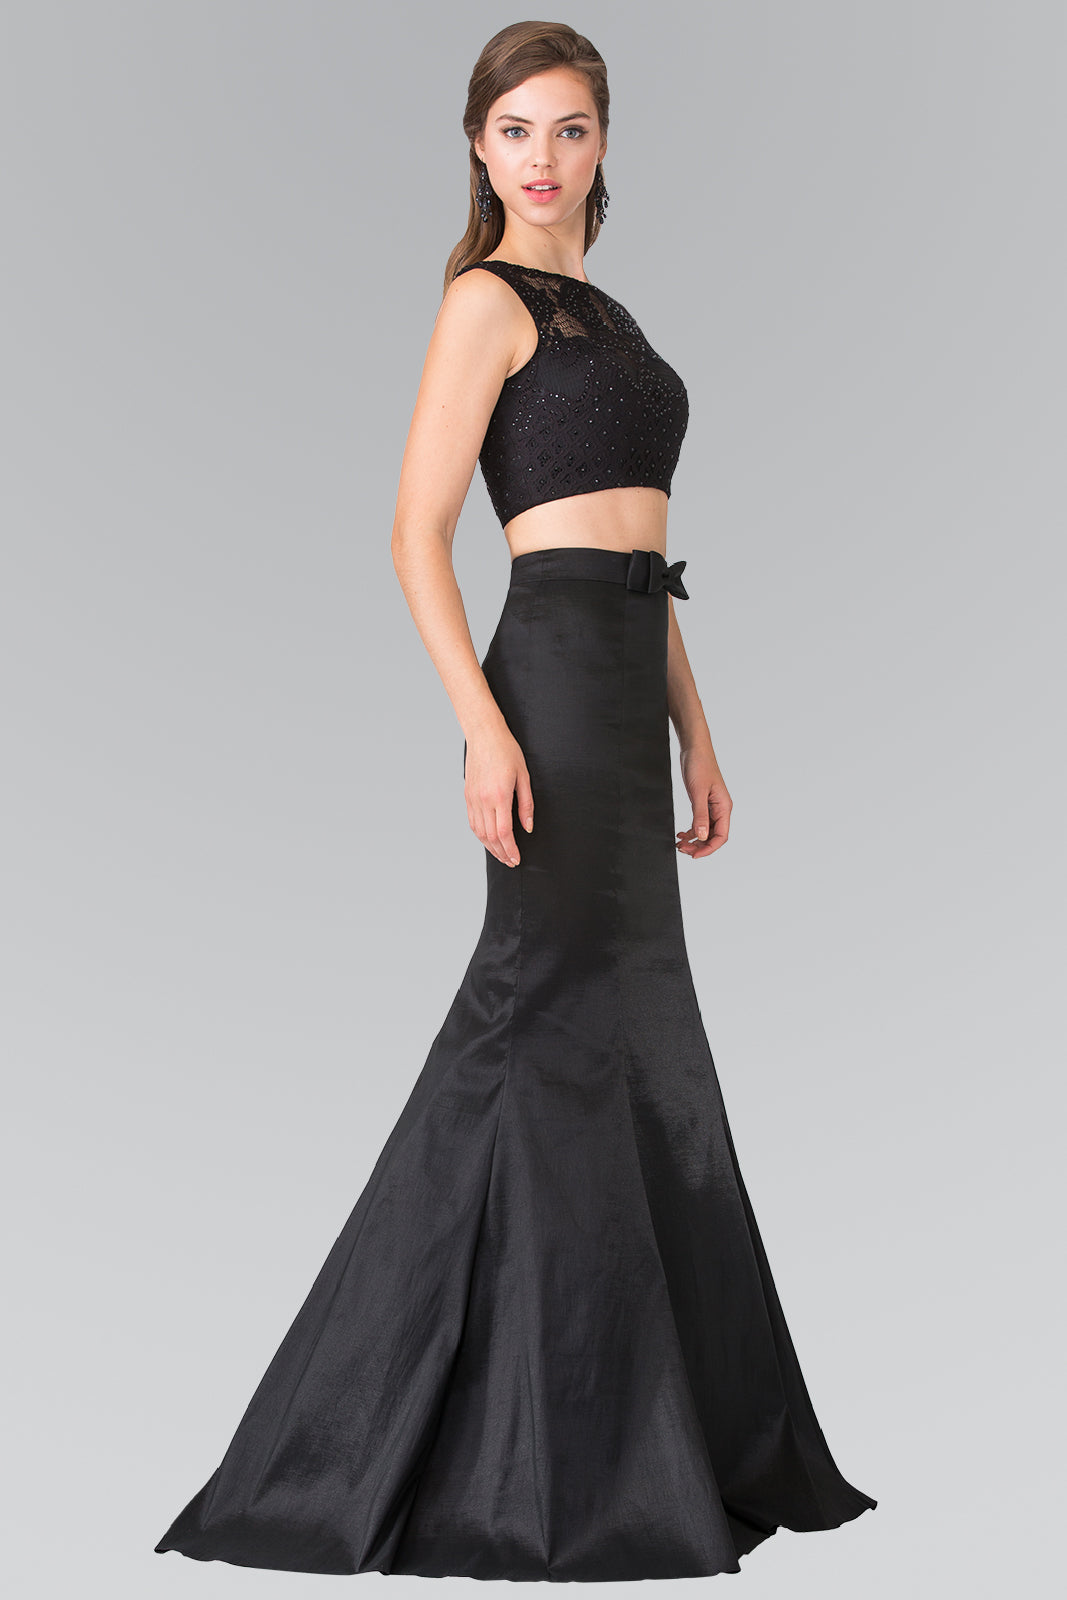 Two Piece Taffeta Long Dress Accented with Ribbon Waist and Lace Top GLGL2354 Elsy Style PROM